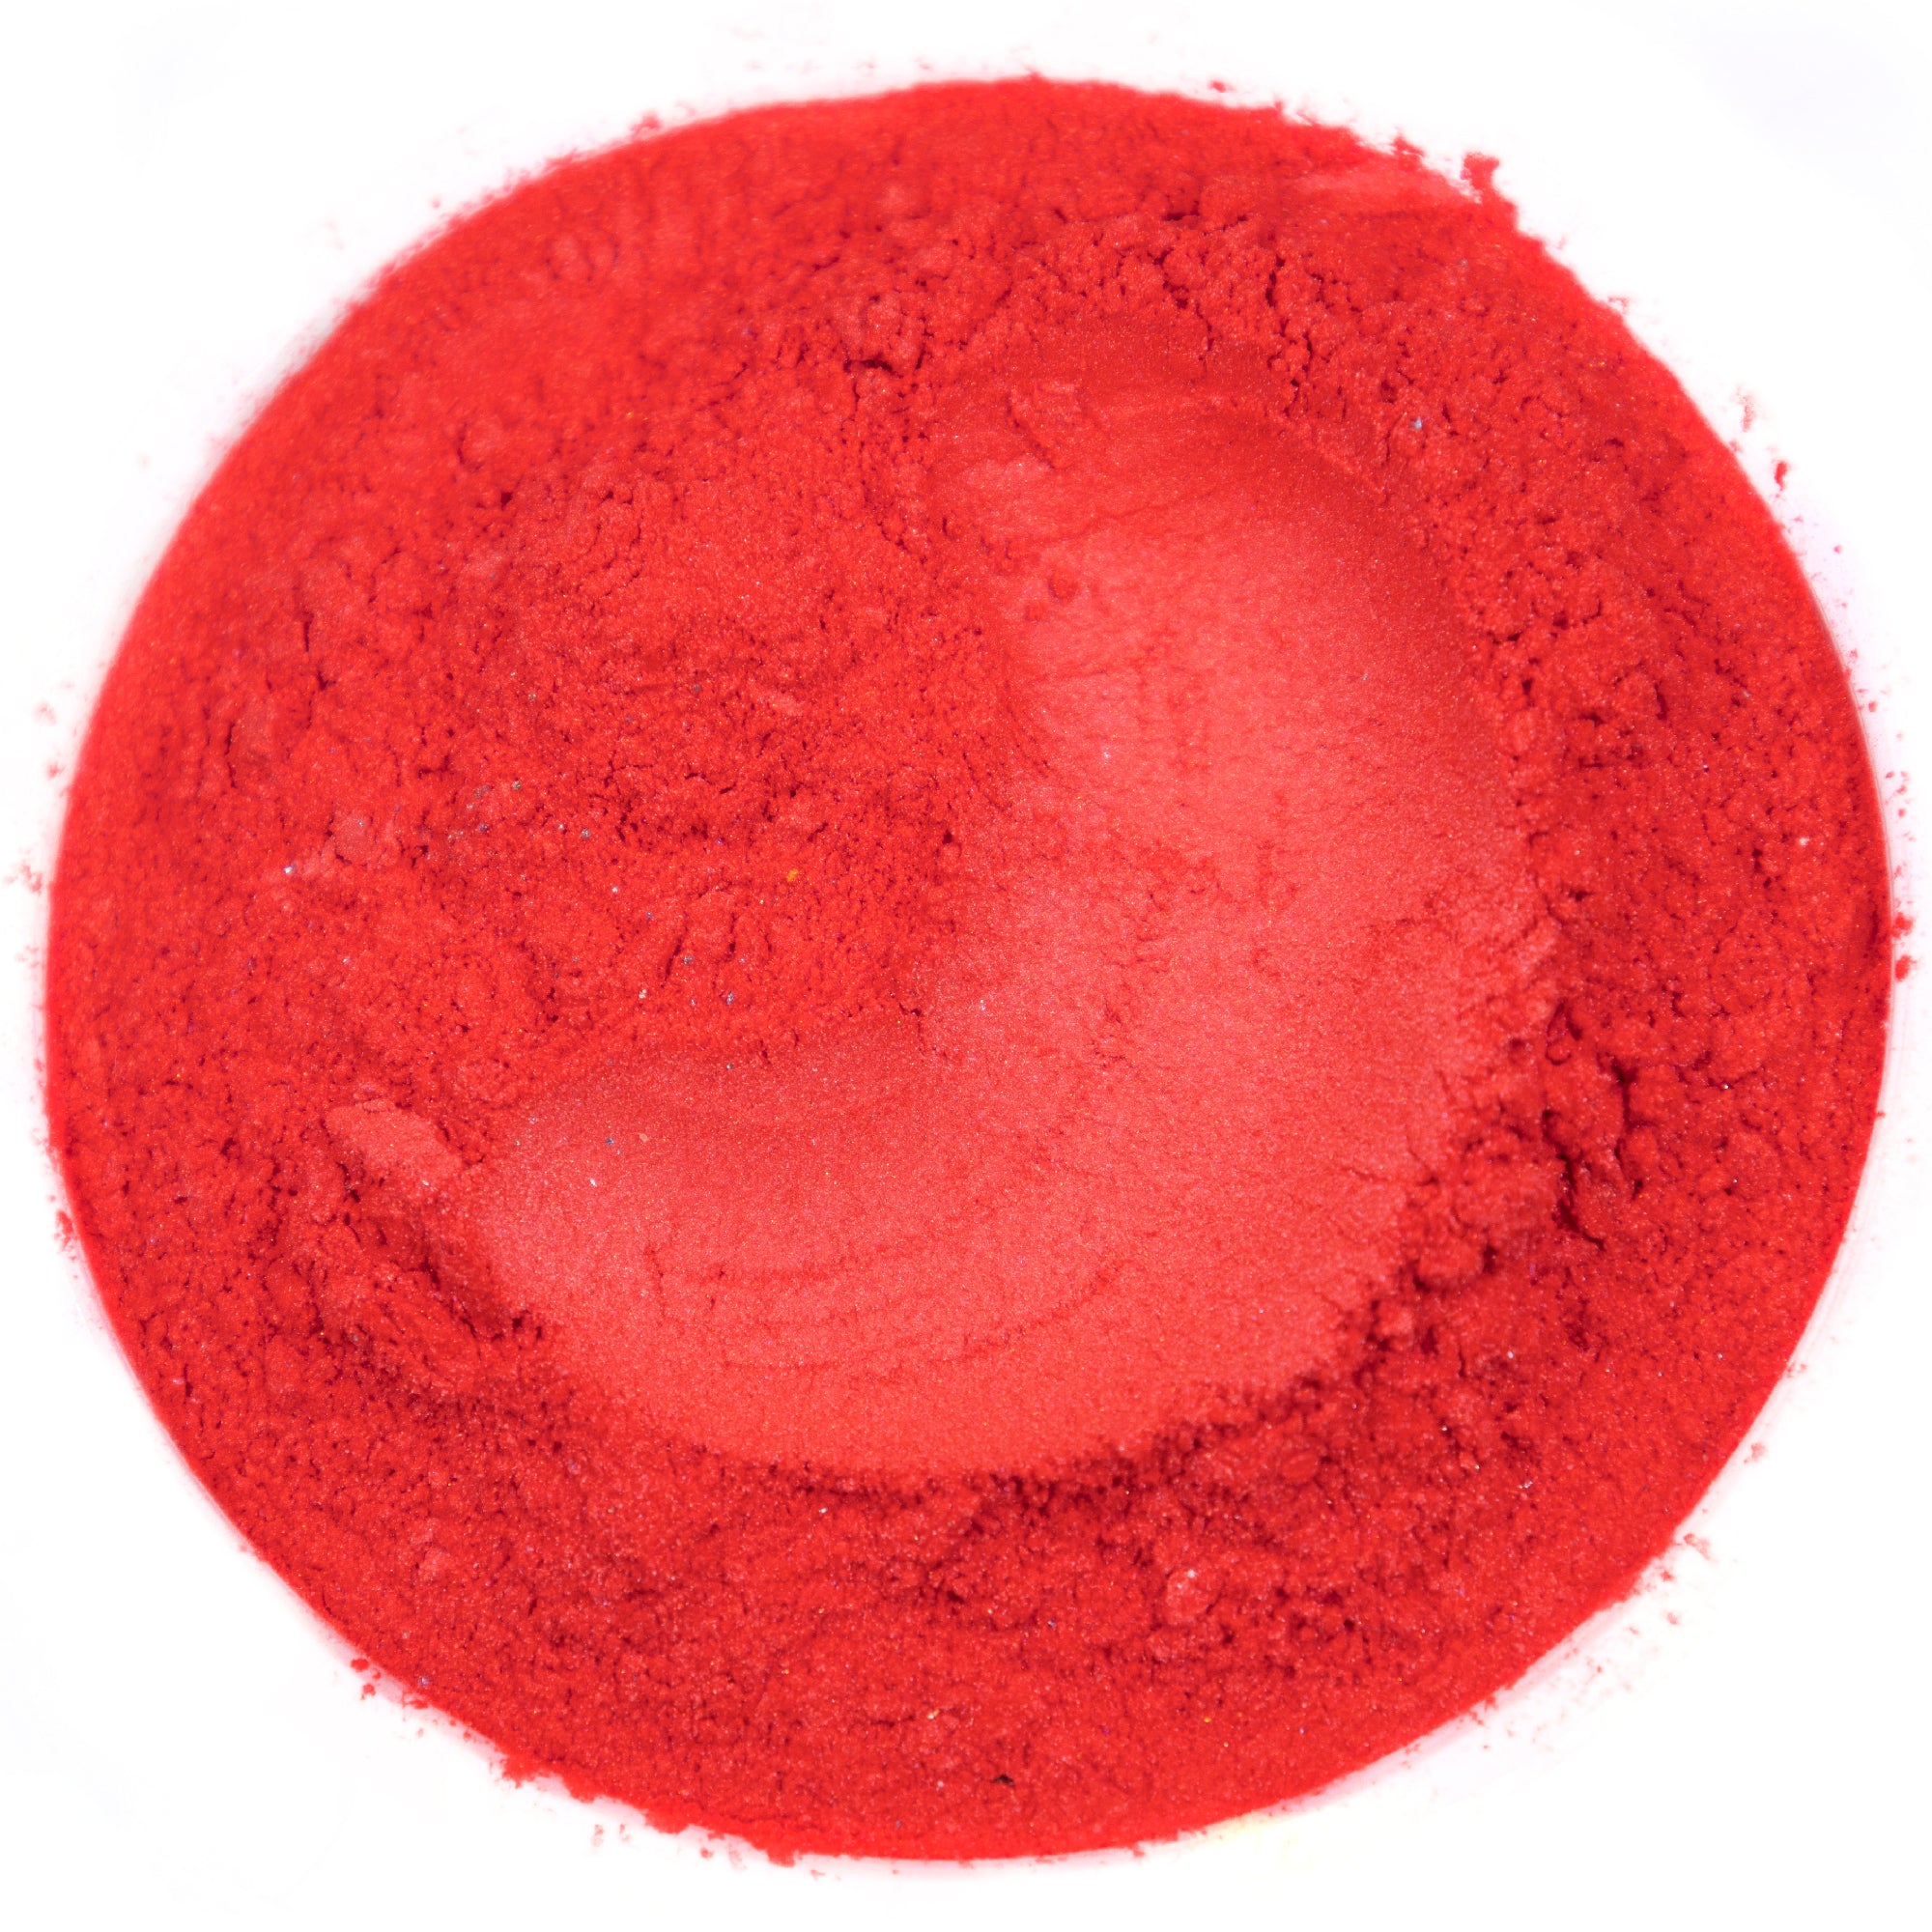 Rolio - Mica Powder - 1 LB of Pigment for Paint, Dye, Soap Making, Nail  Polish, Epoxy Resin, Candle Making, Bath Bombs, Slime - (Lavender Scent)